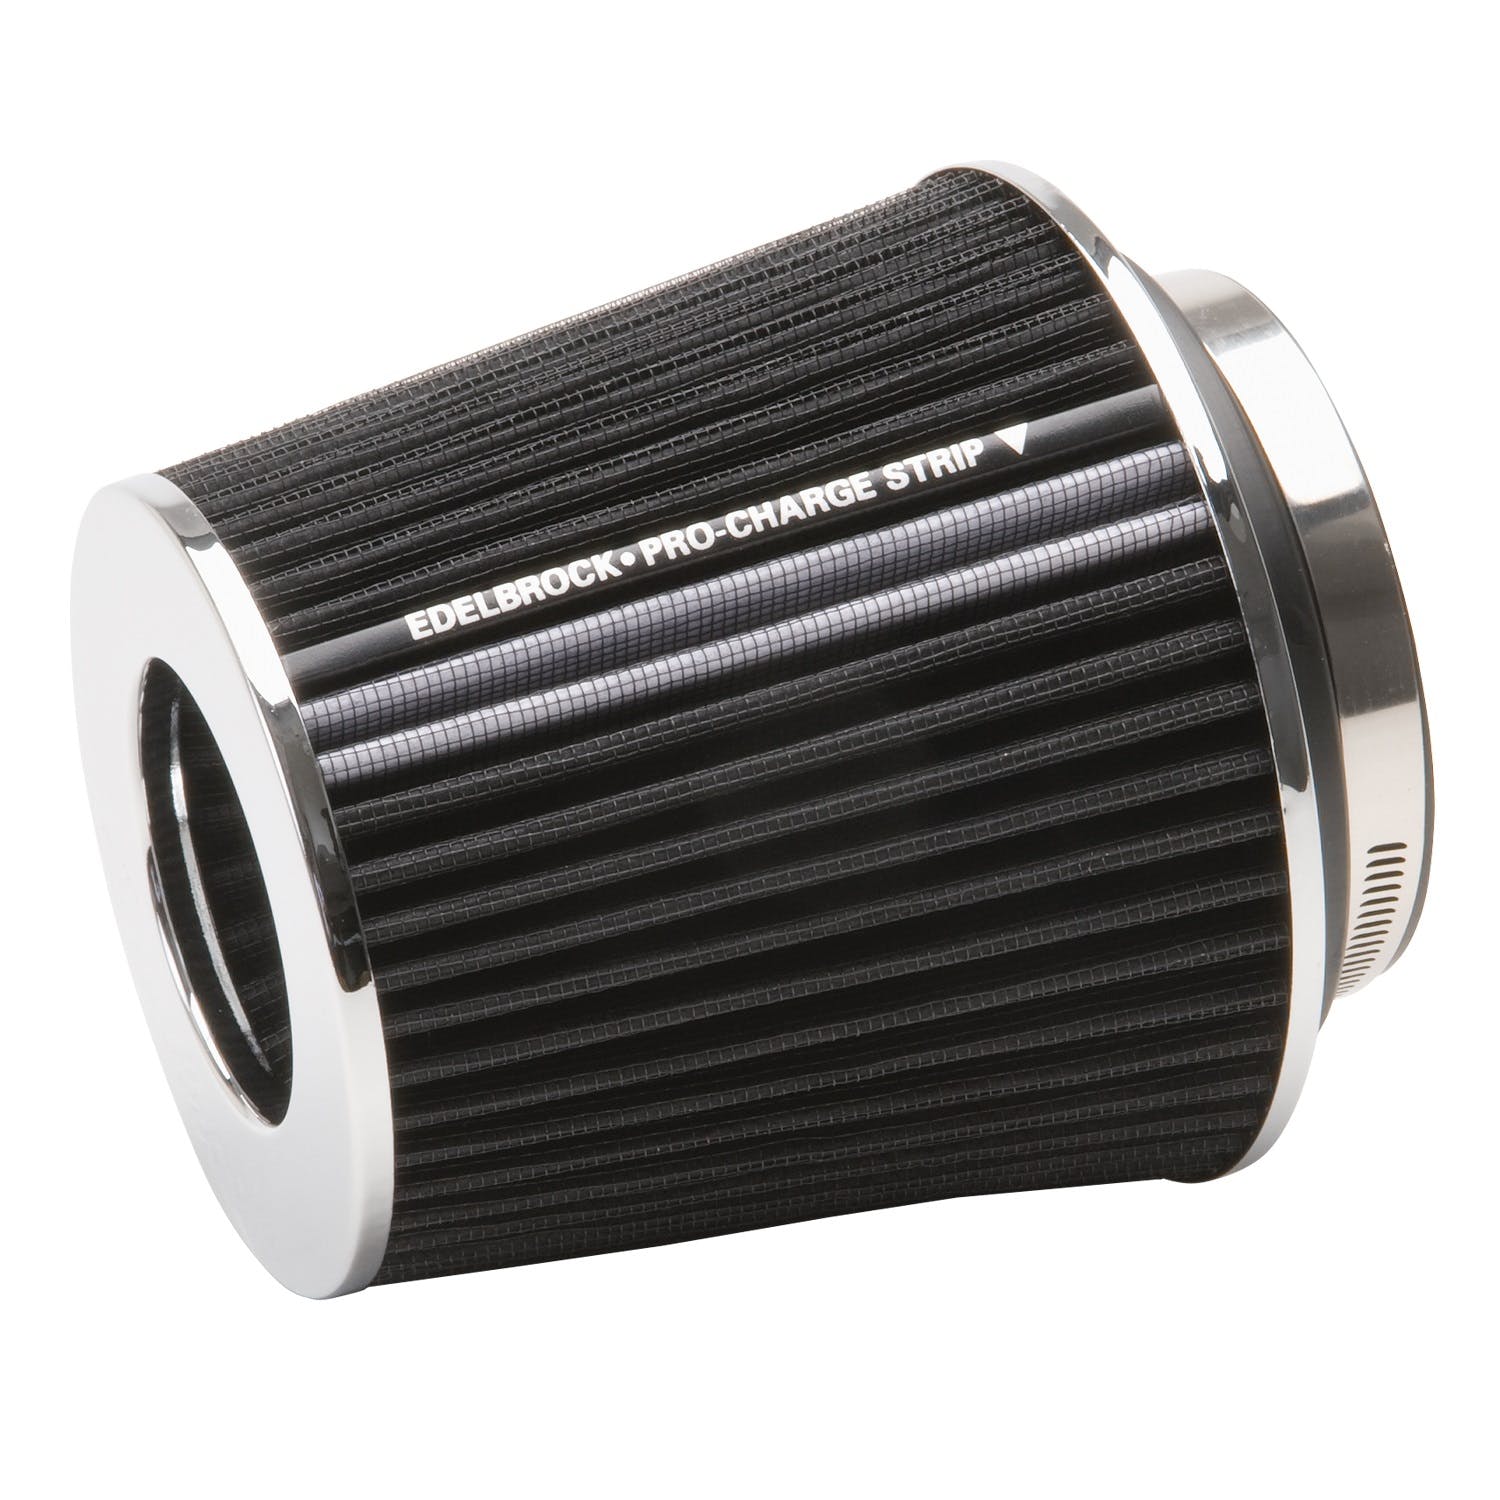 Edelbrock 43640 Pro-Flo Universal Black Medium Conical Air Filter with 3, 3.5, and 4 Inlet